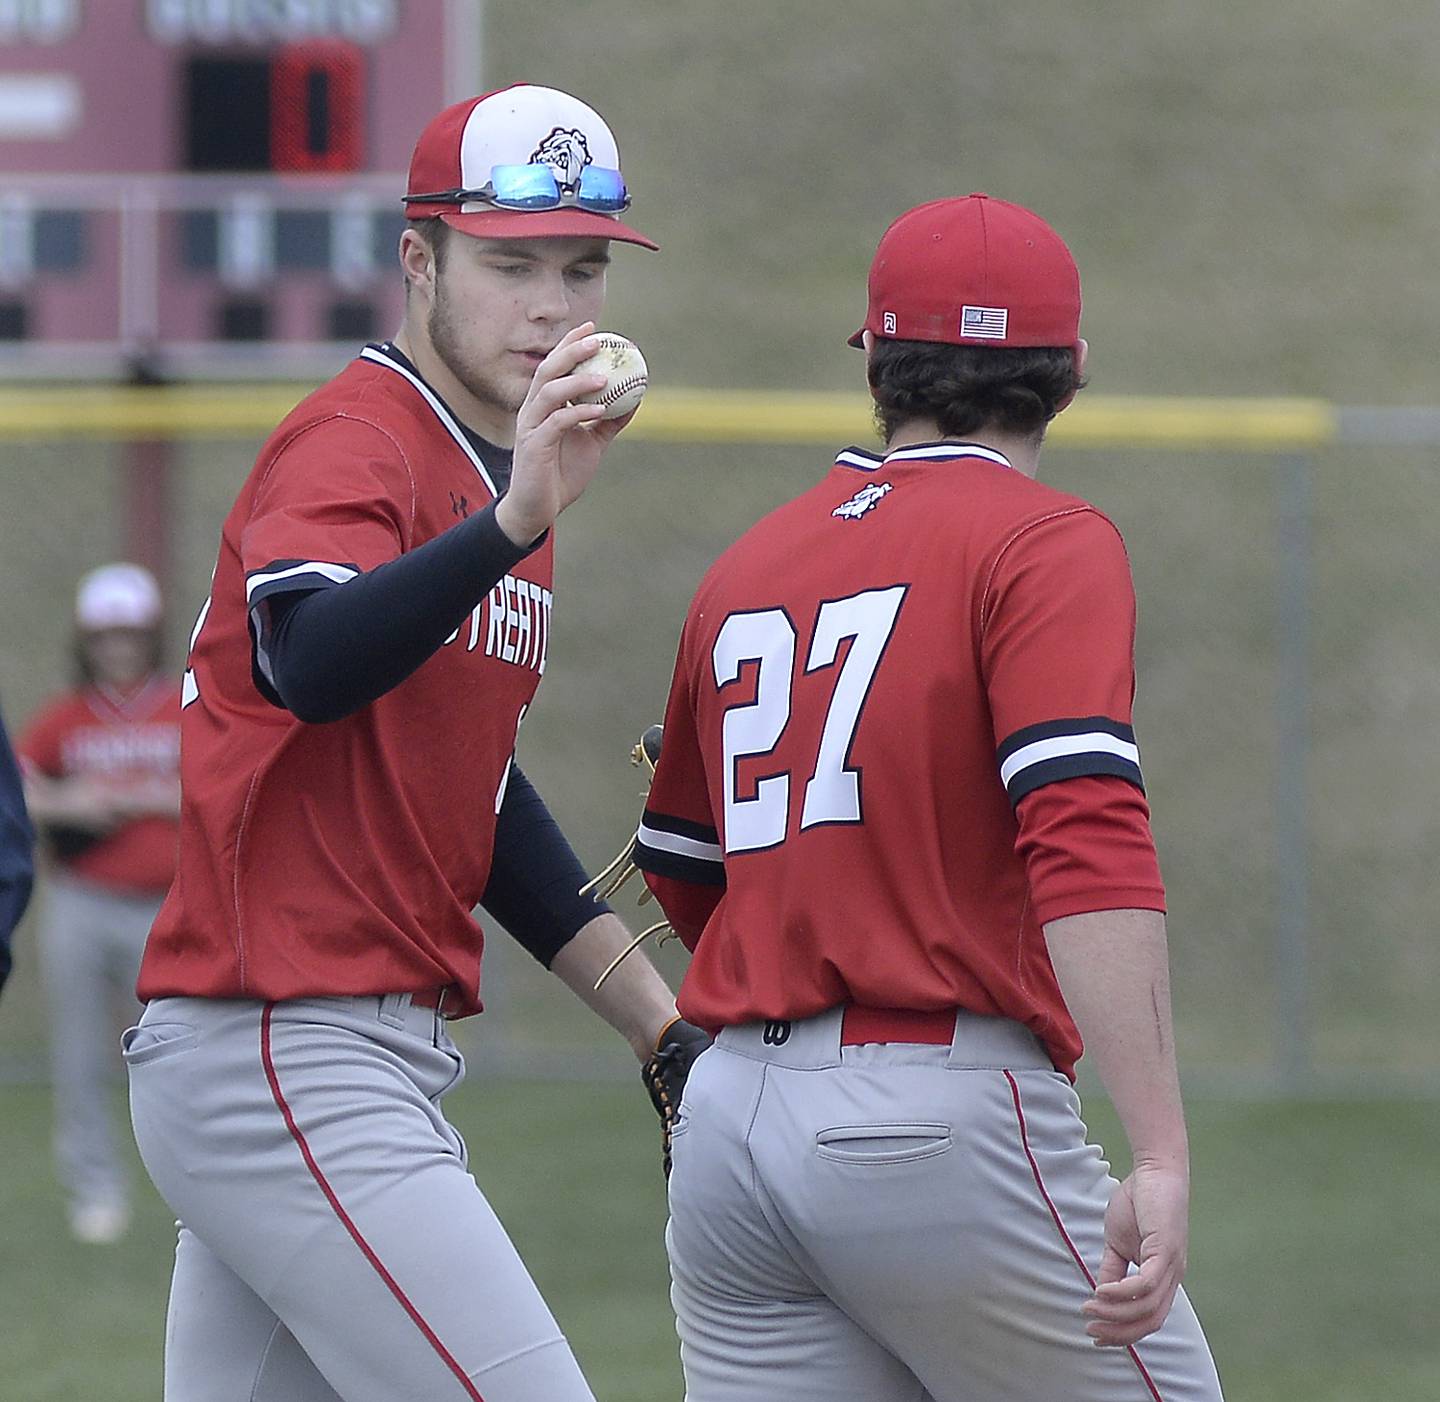 Landon Muntz hands the ball back to team mate pitcher Parker Phillis after Phillis gave up a hit putting two Pirates on base on Thursday, March 30, 2023 at Ottawa High School.